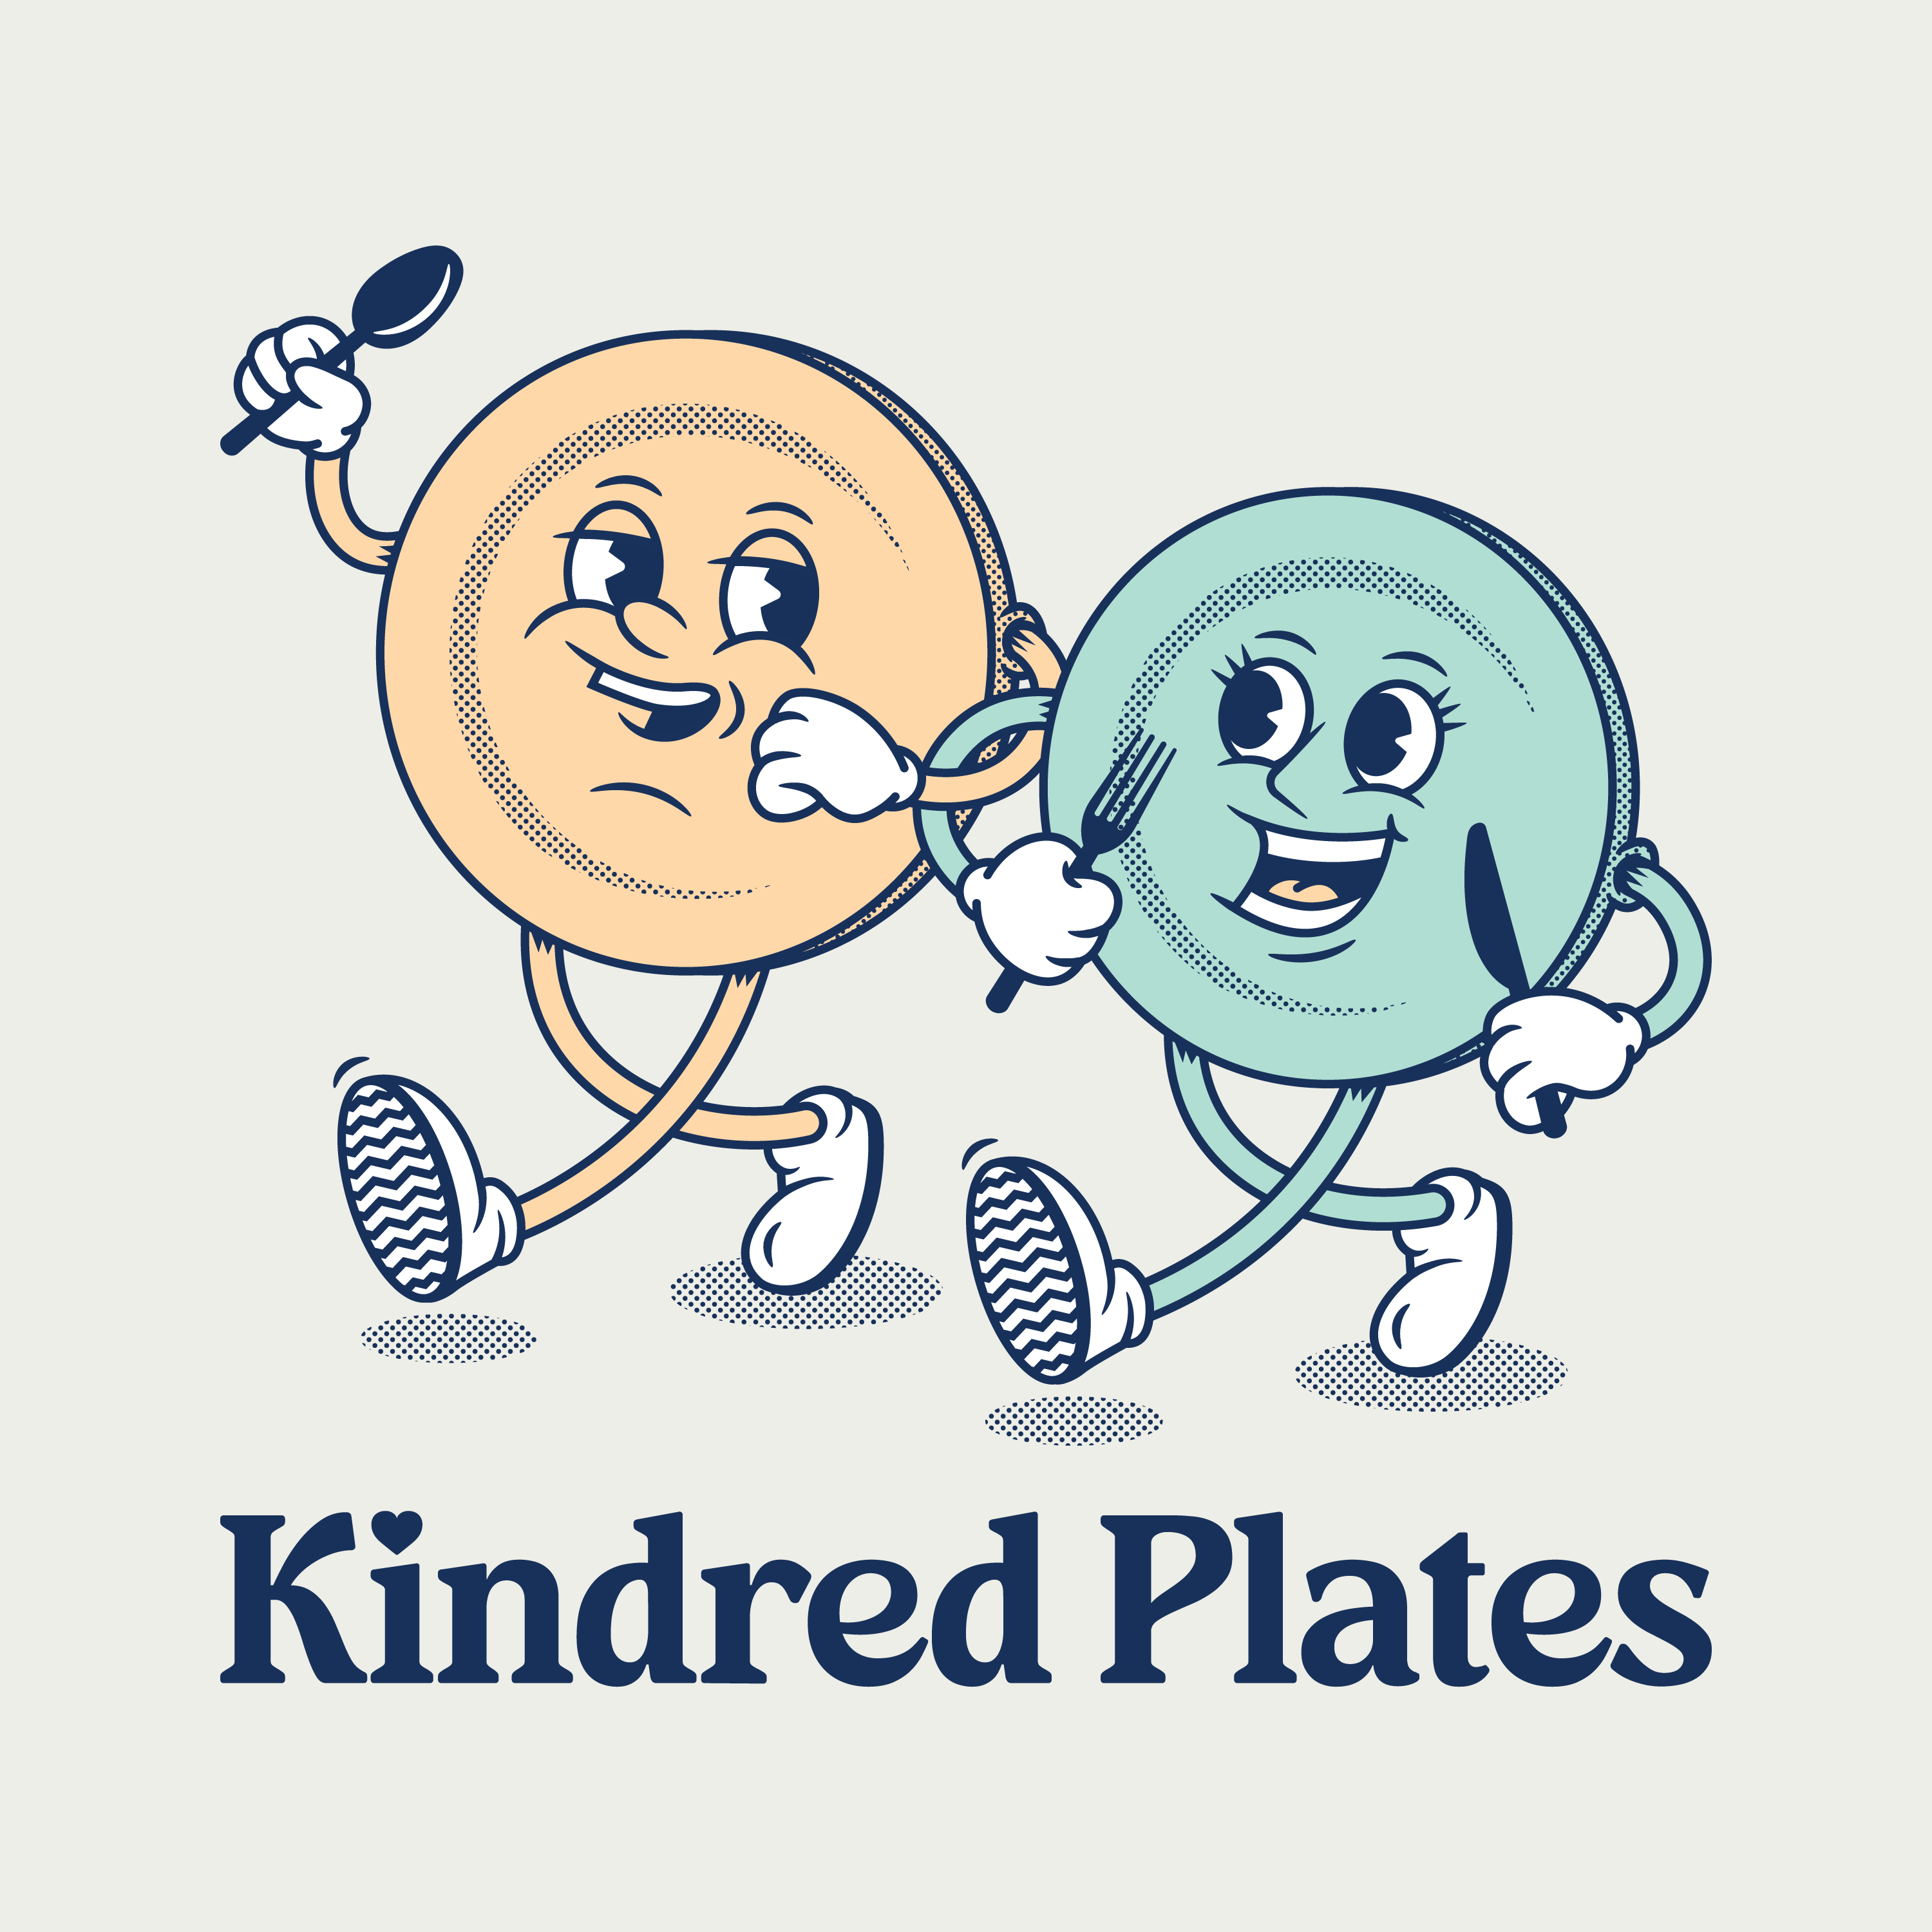 Kindred Plates